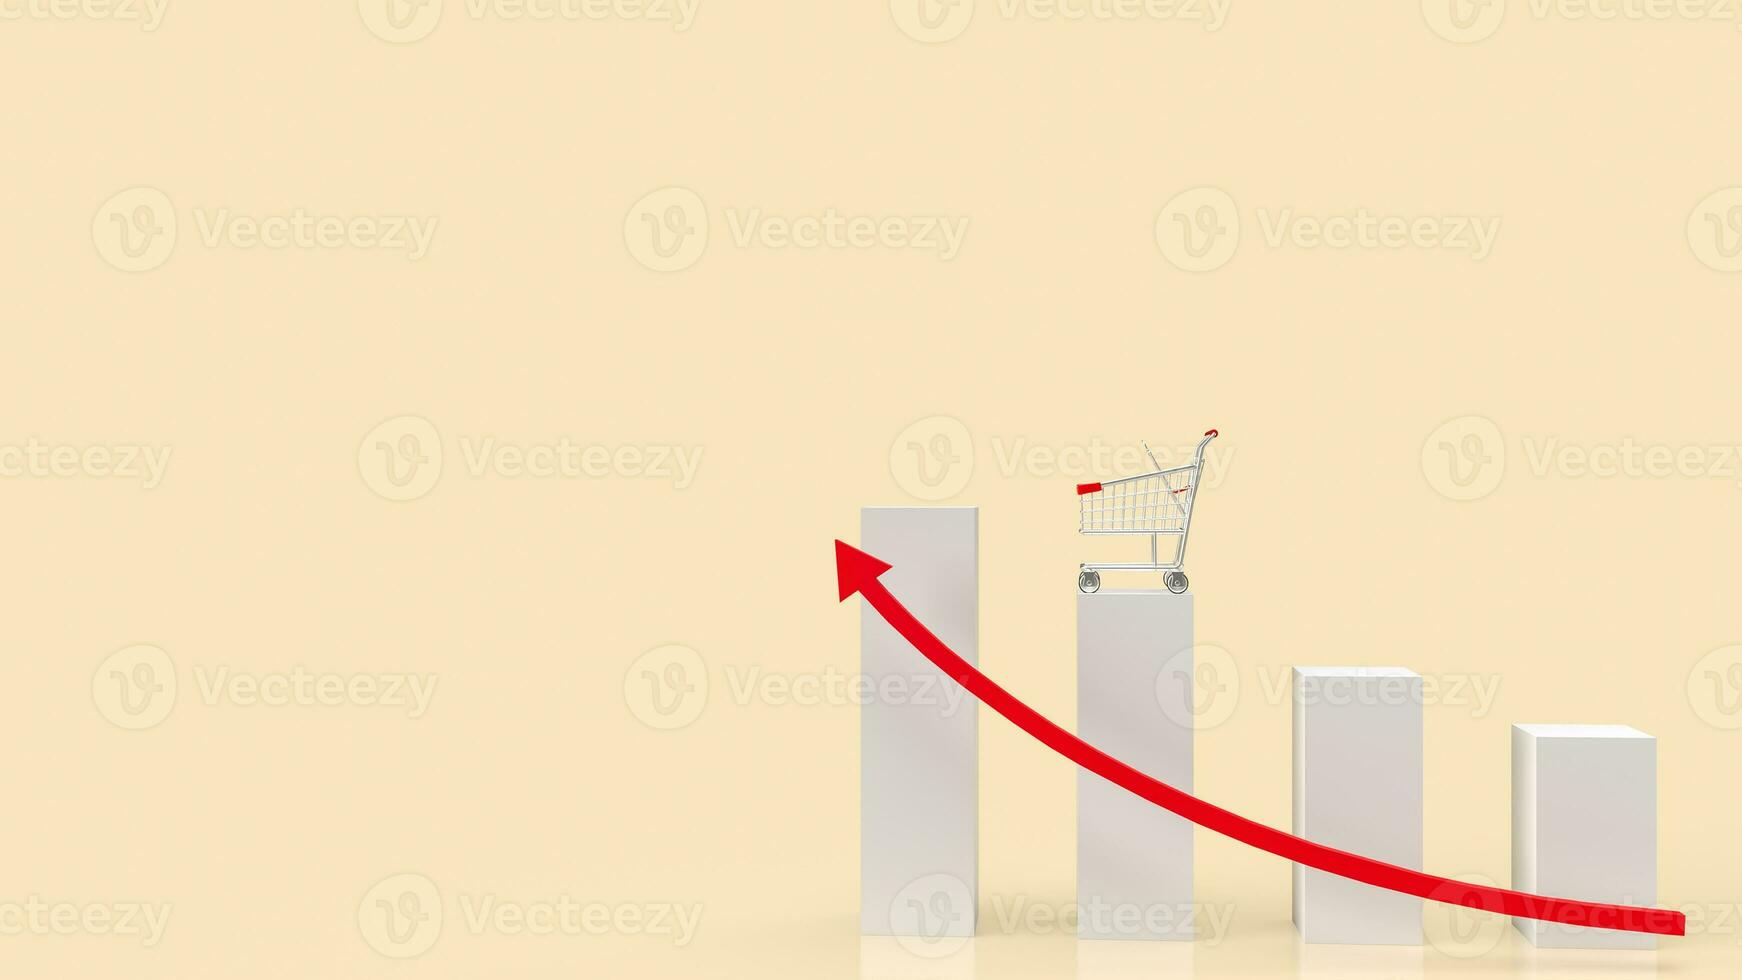 The super market cart and chart Business 3d rendering. photo